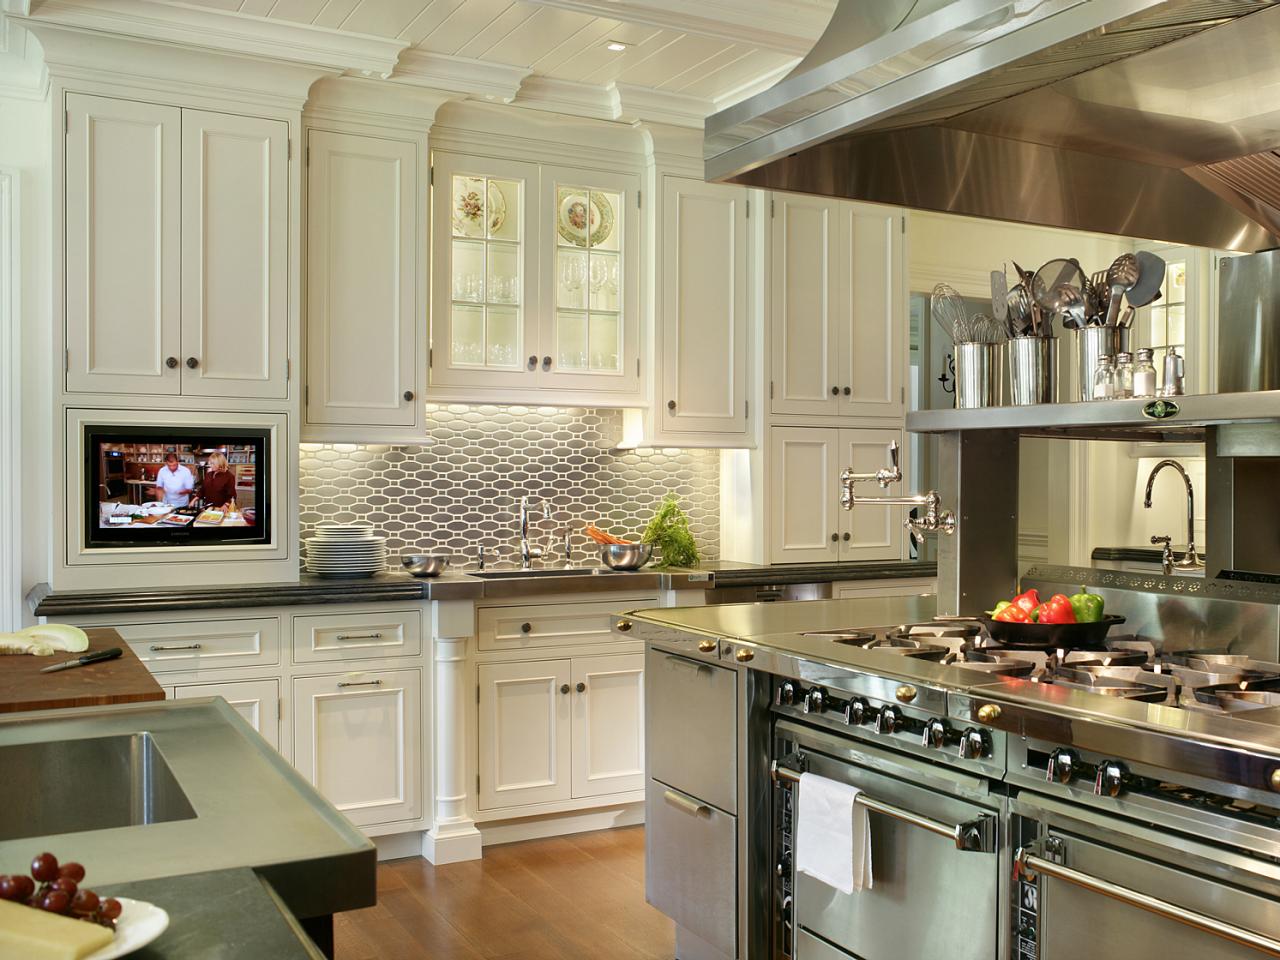 Kitchen Wall Cabinets Pictures, Options, Tips & Ideas   HGTV